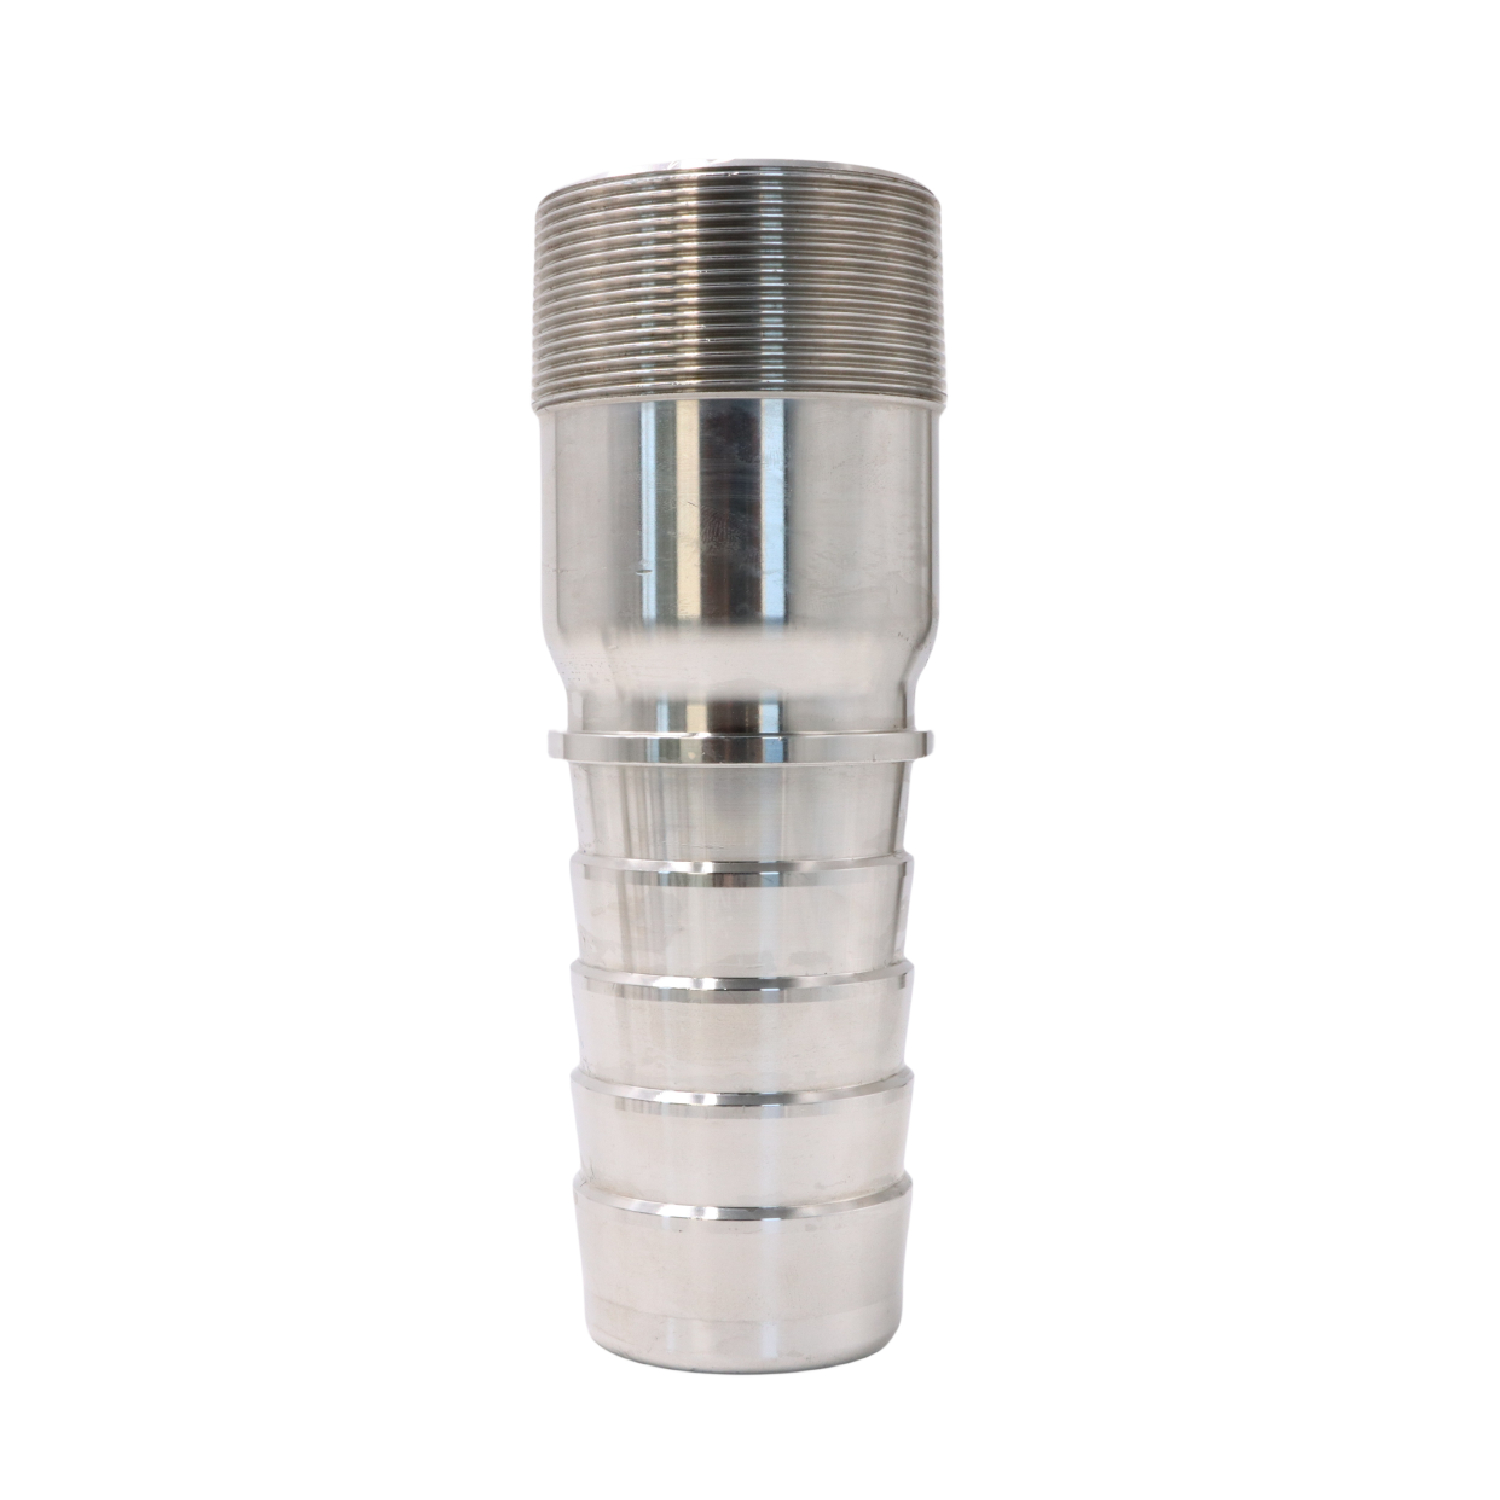 Stainless Steel SS316 Sanitary High Pressure DIN11864 JN-FL 23 2012 Male Hose Nipple For Silicone Tube